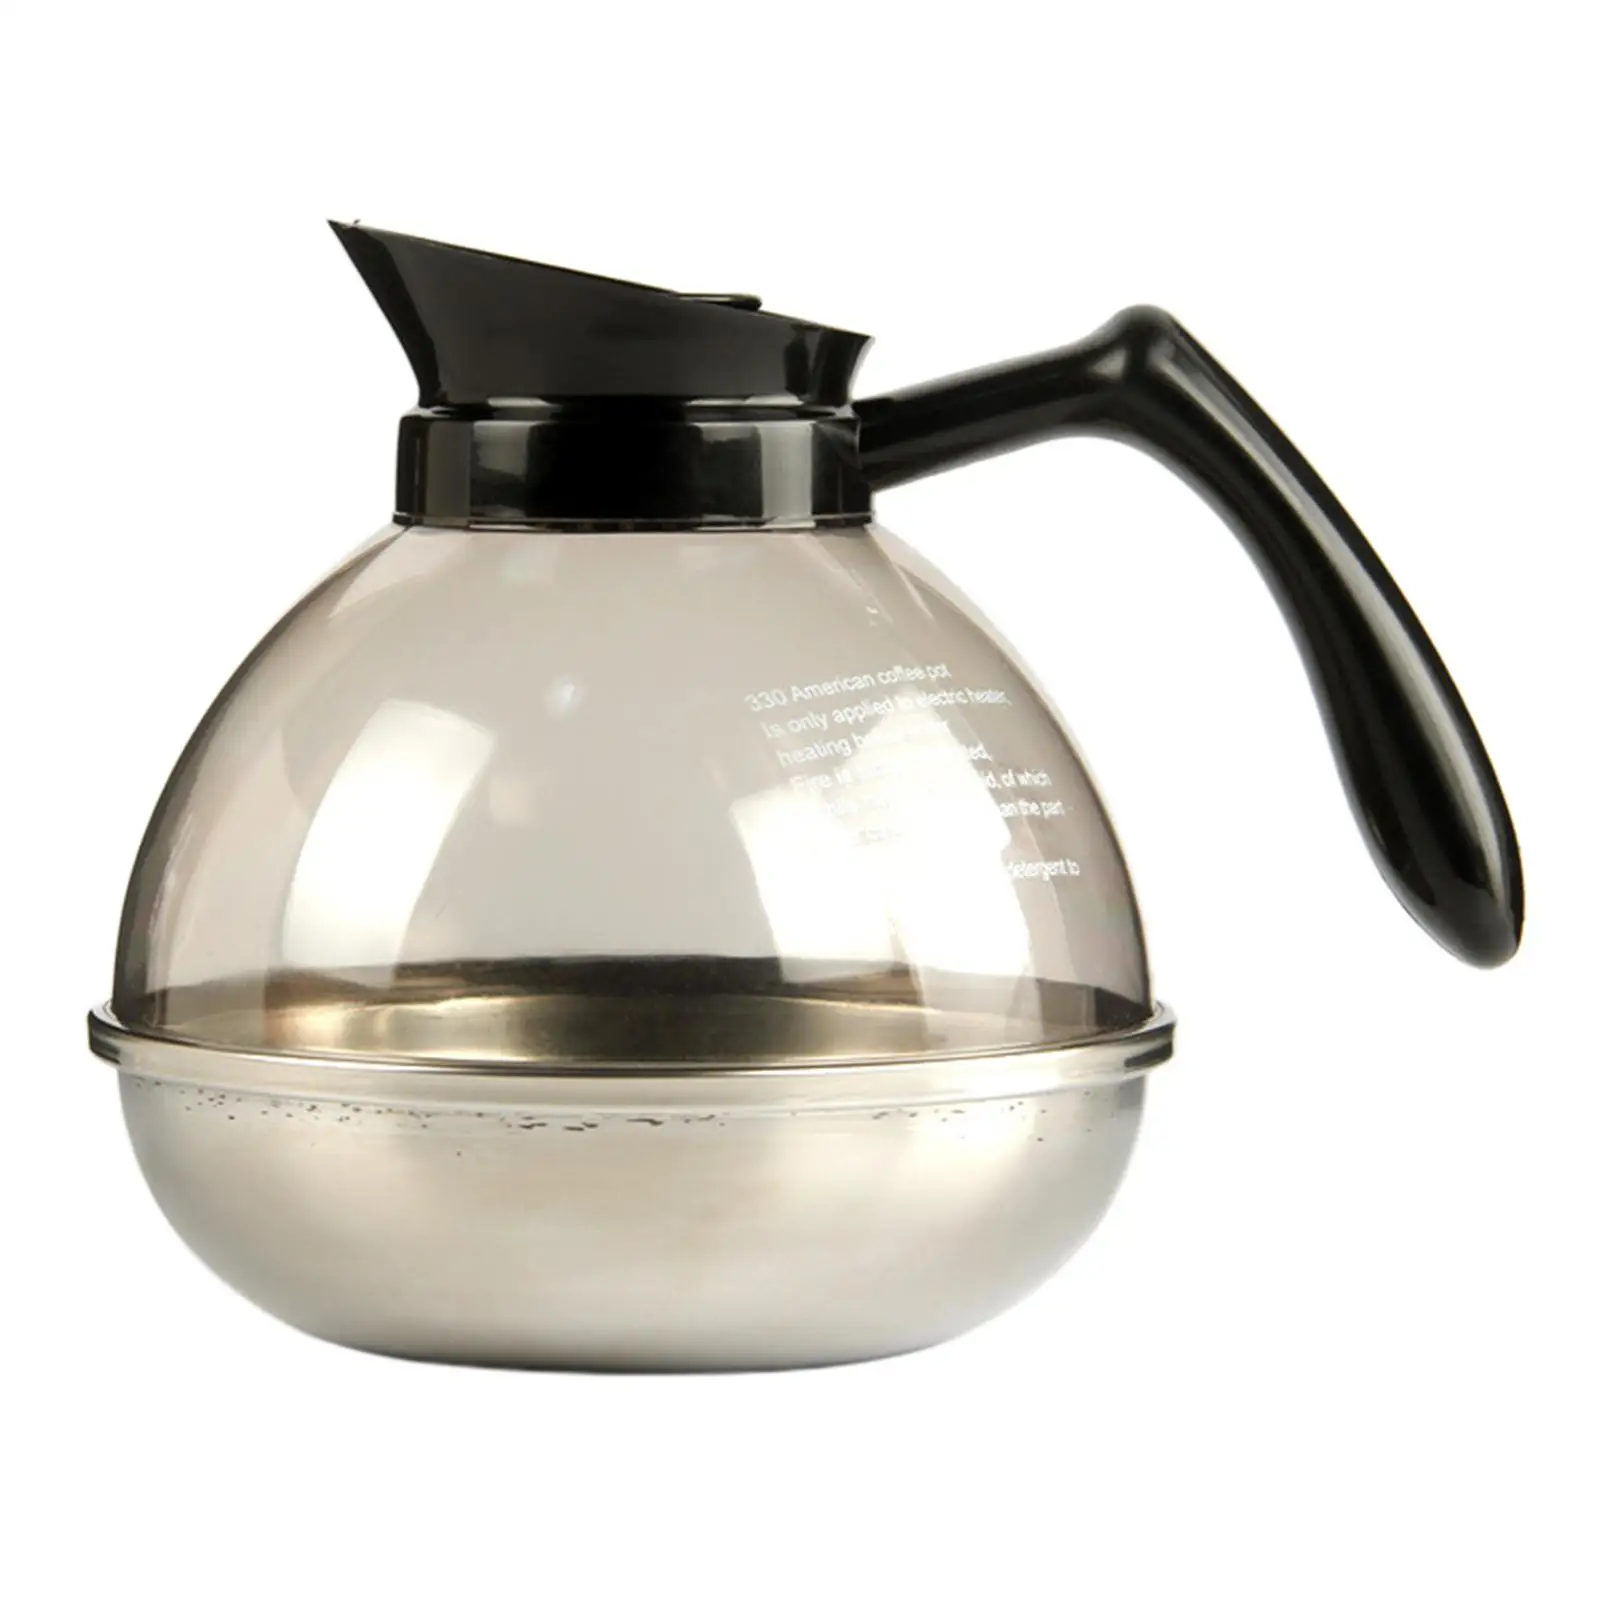 Kitchen Coffee Decanter Replacement Carafe Coffee Carafe for Kitchen Bar Office Cafe Restaurant